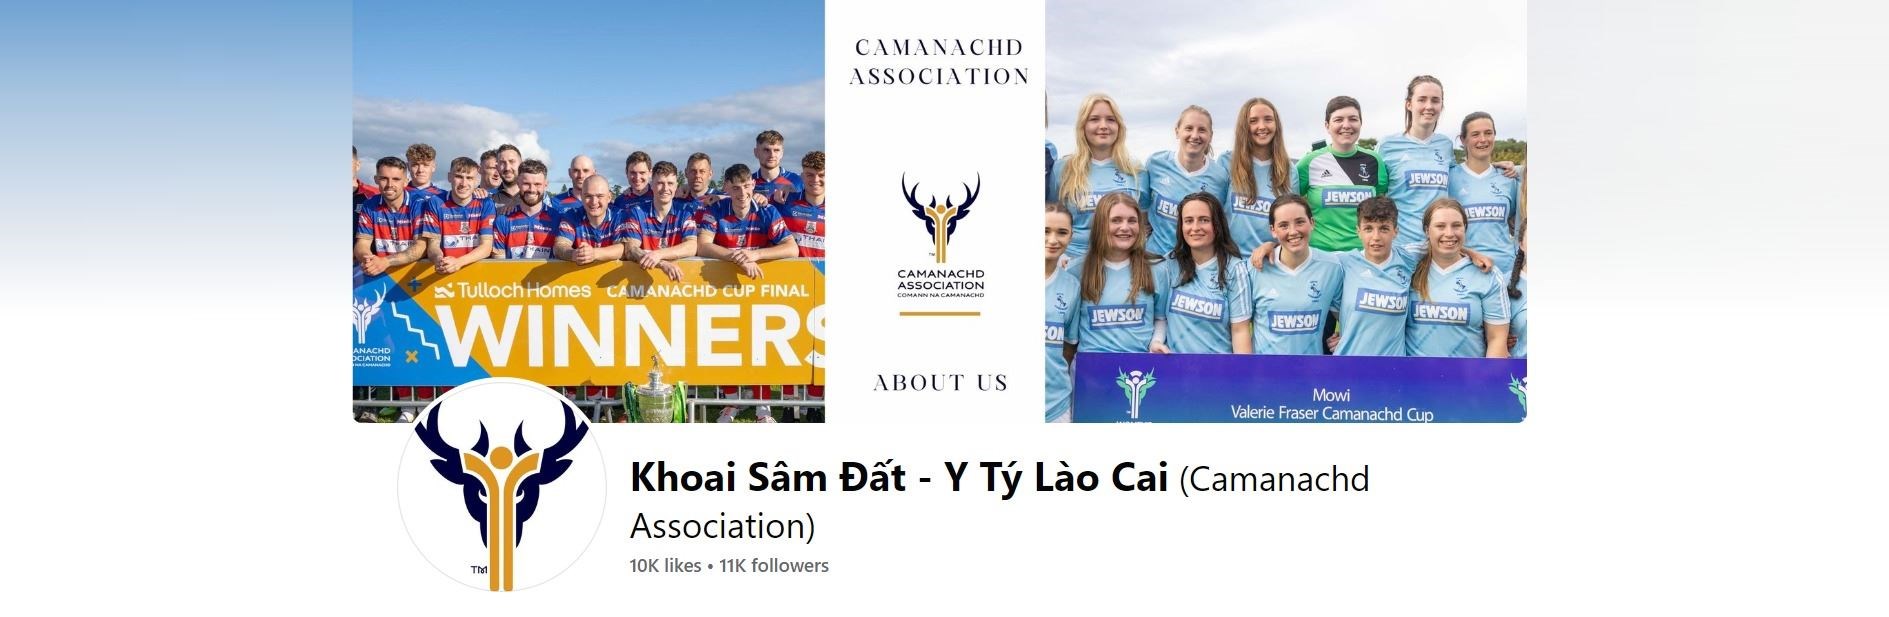 The Camanachd Association's current Facebook page.